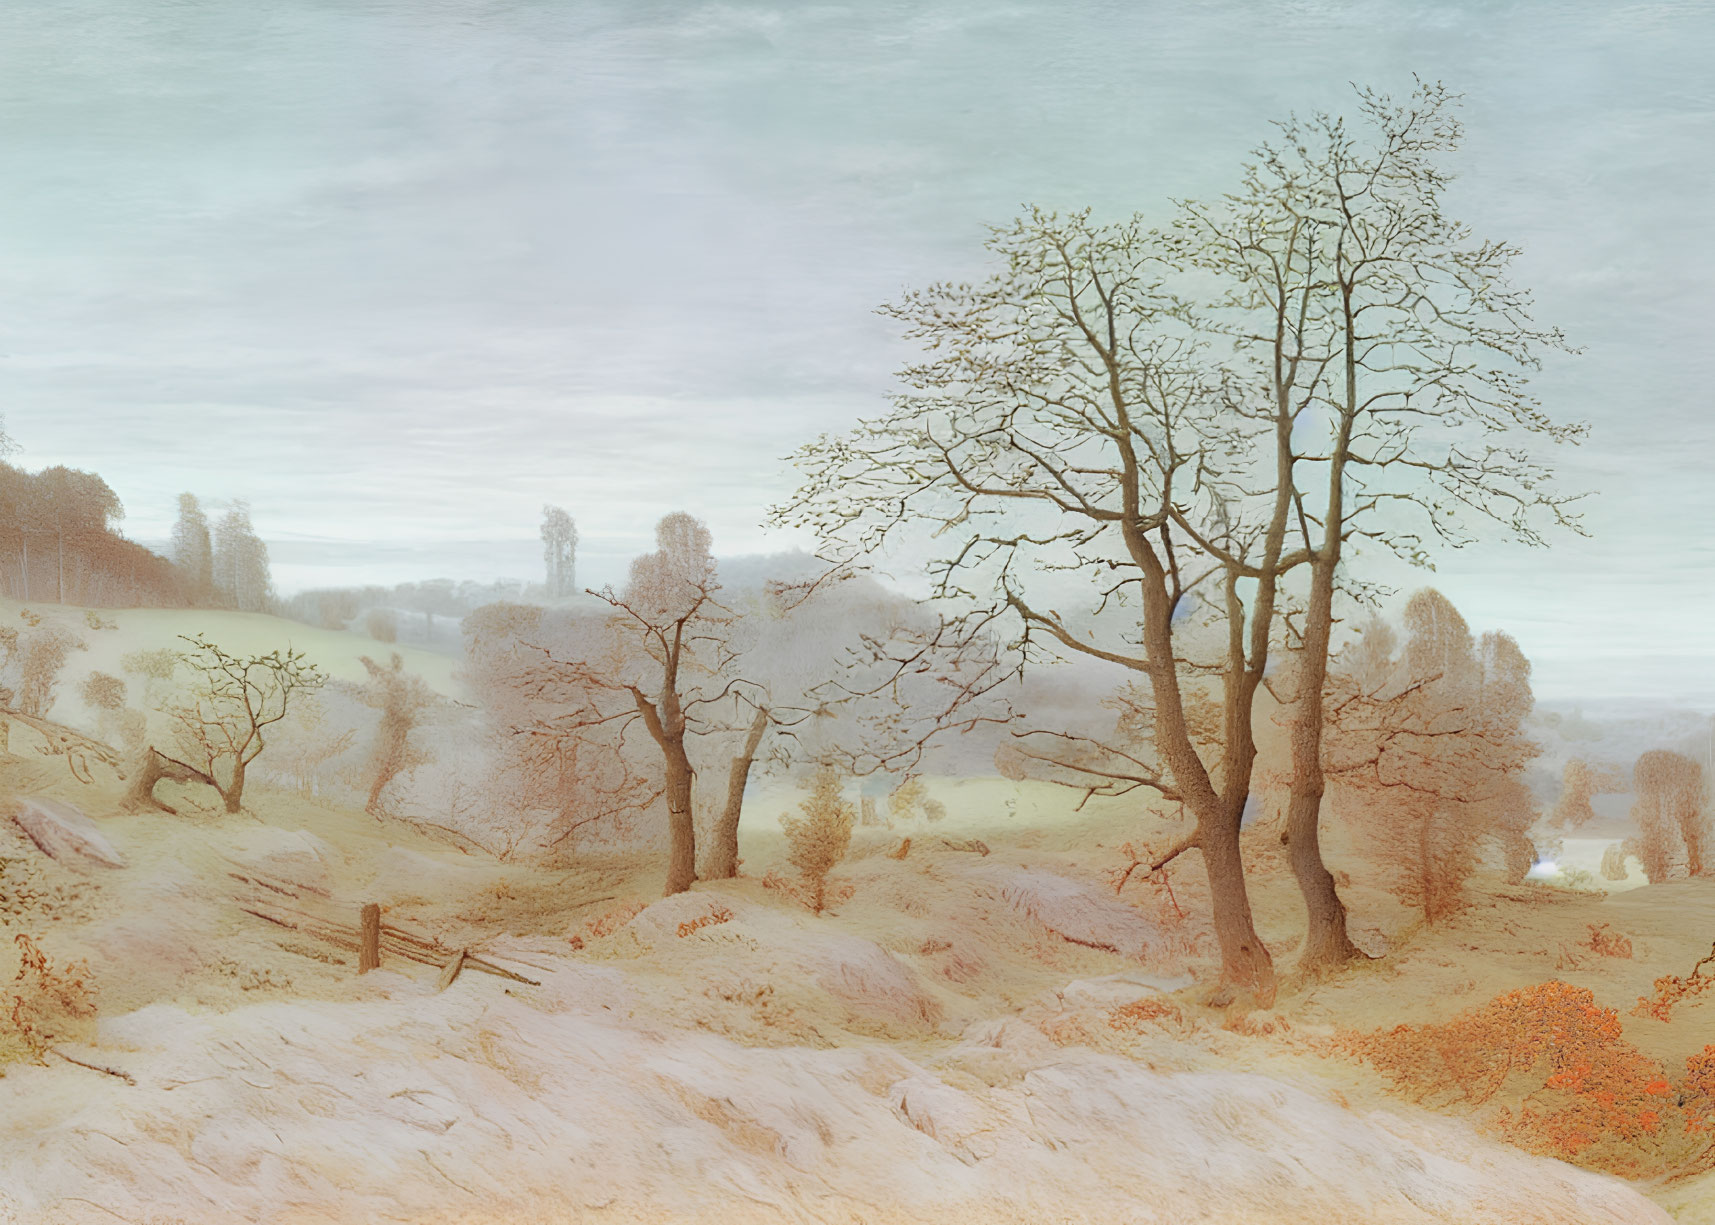 Tranquil winter landscape: bare trees, frost-covered ground, pale sky